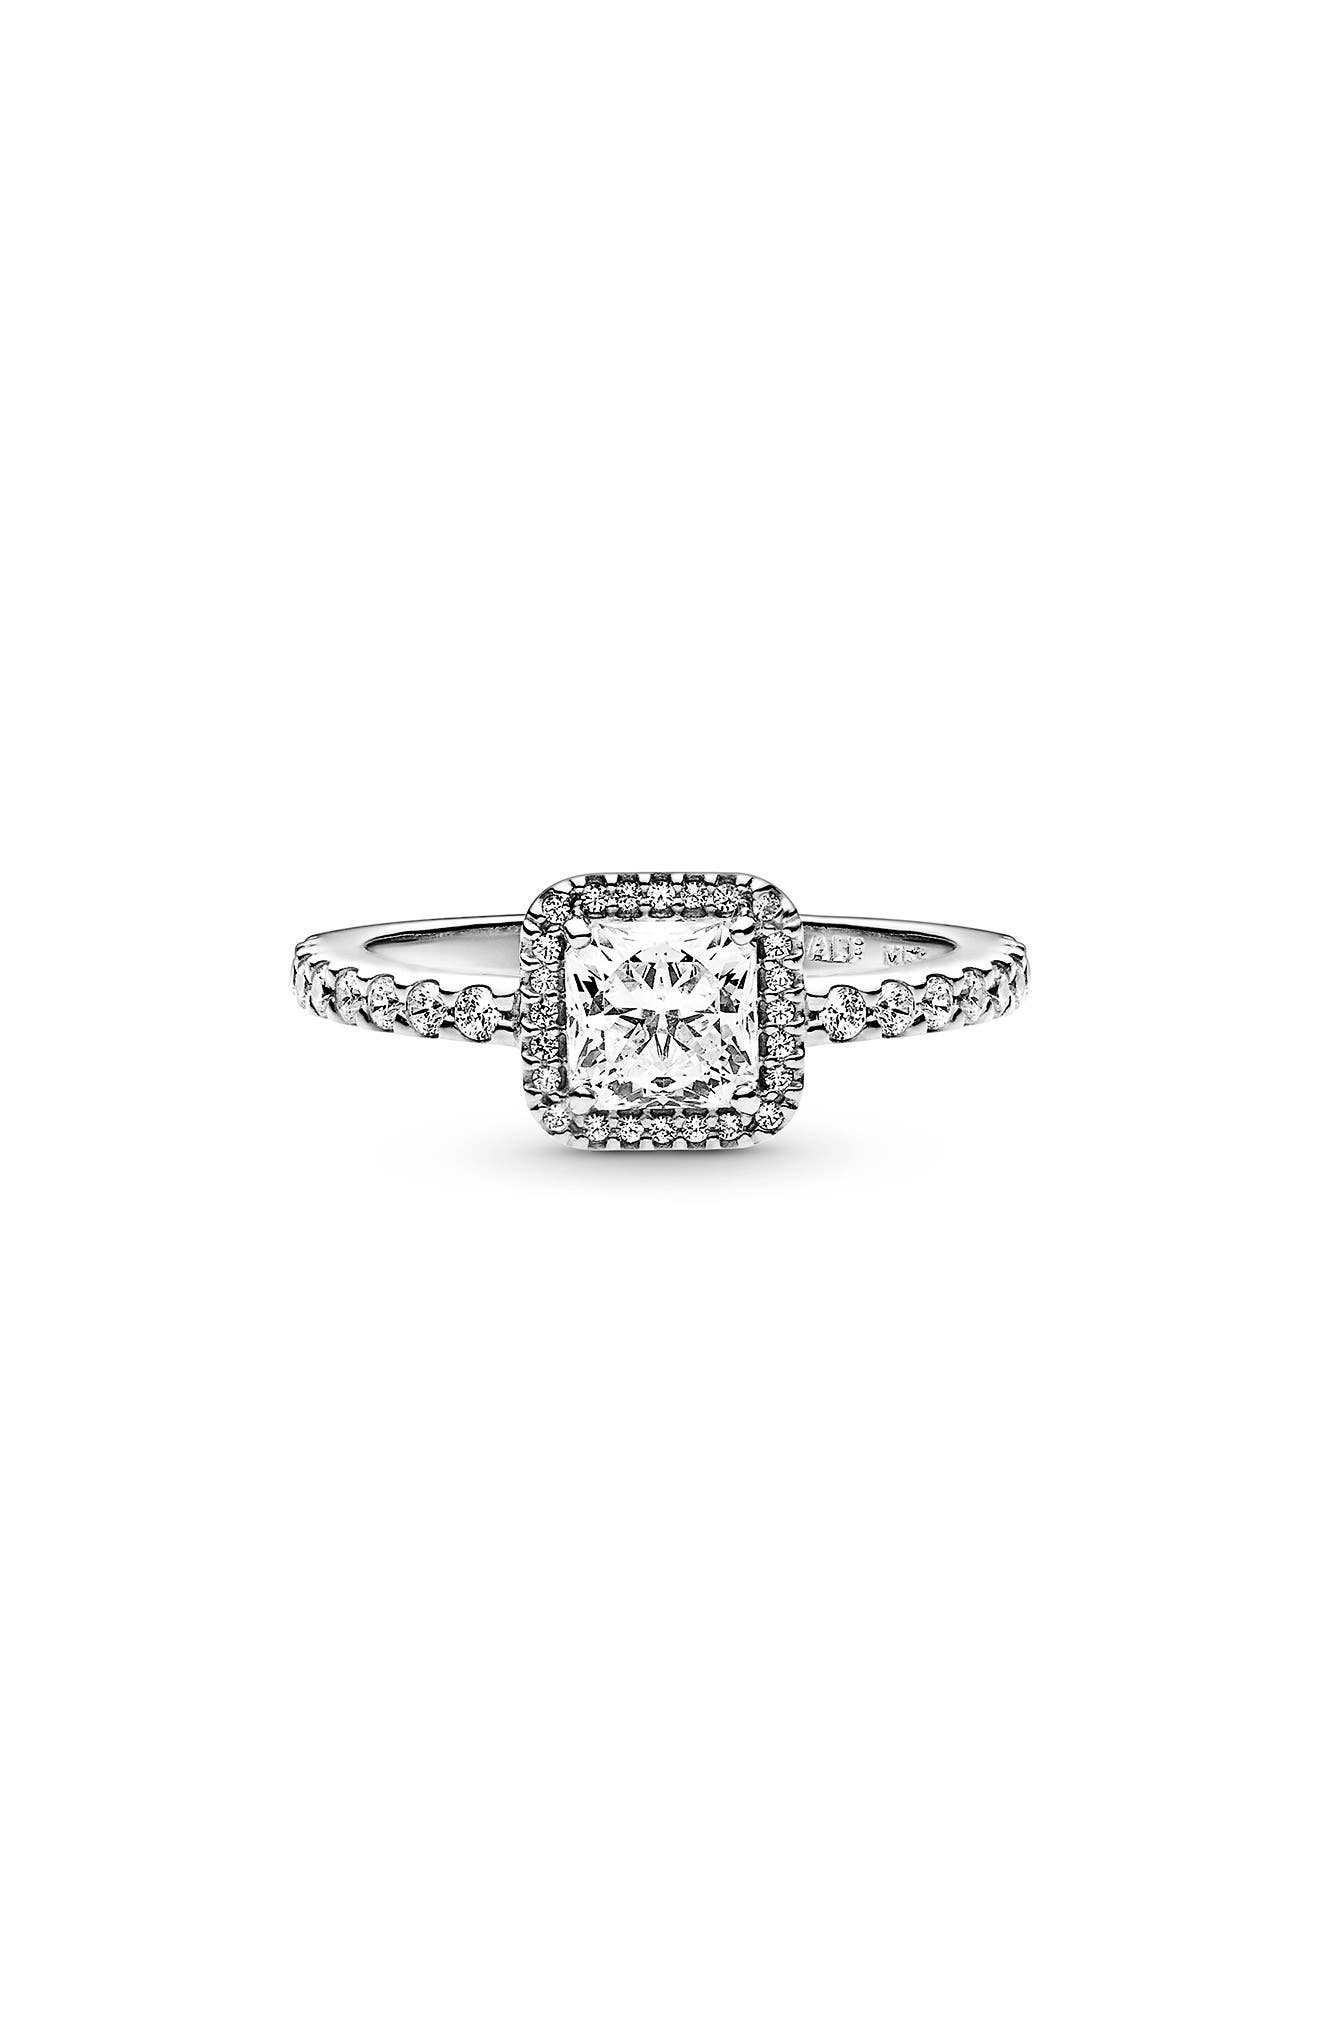 PANDORA Timeless Elegance Ring in Clear at Nordstrom, Size 8.5